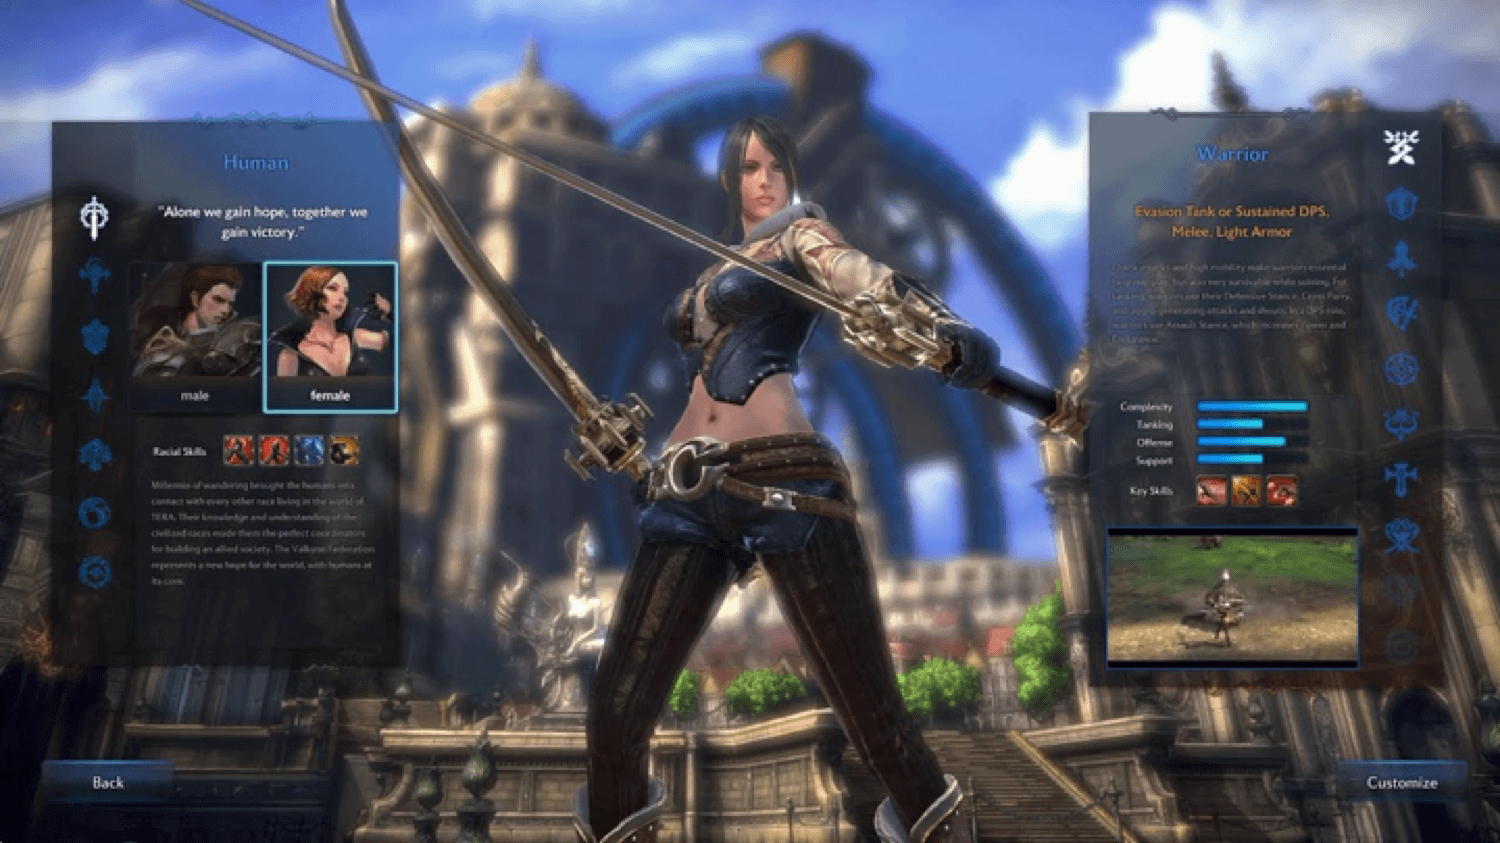 Our review and comments for Tera Online